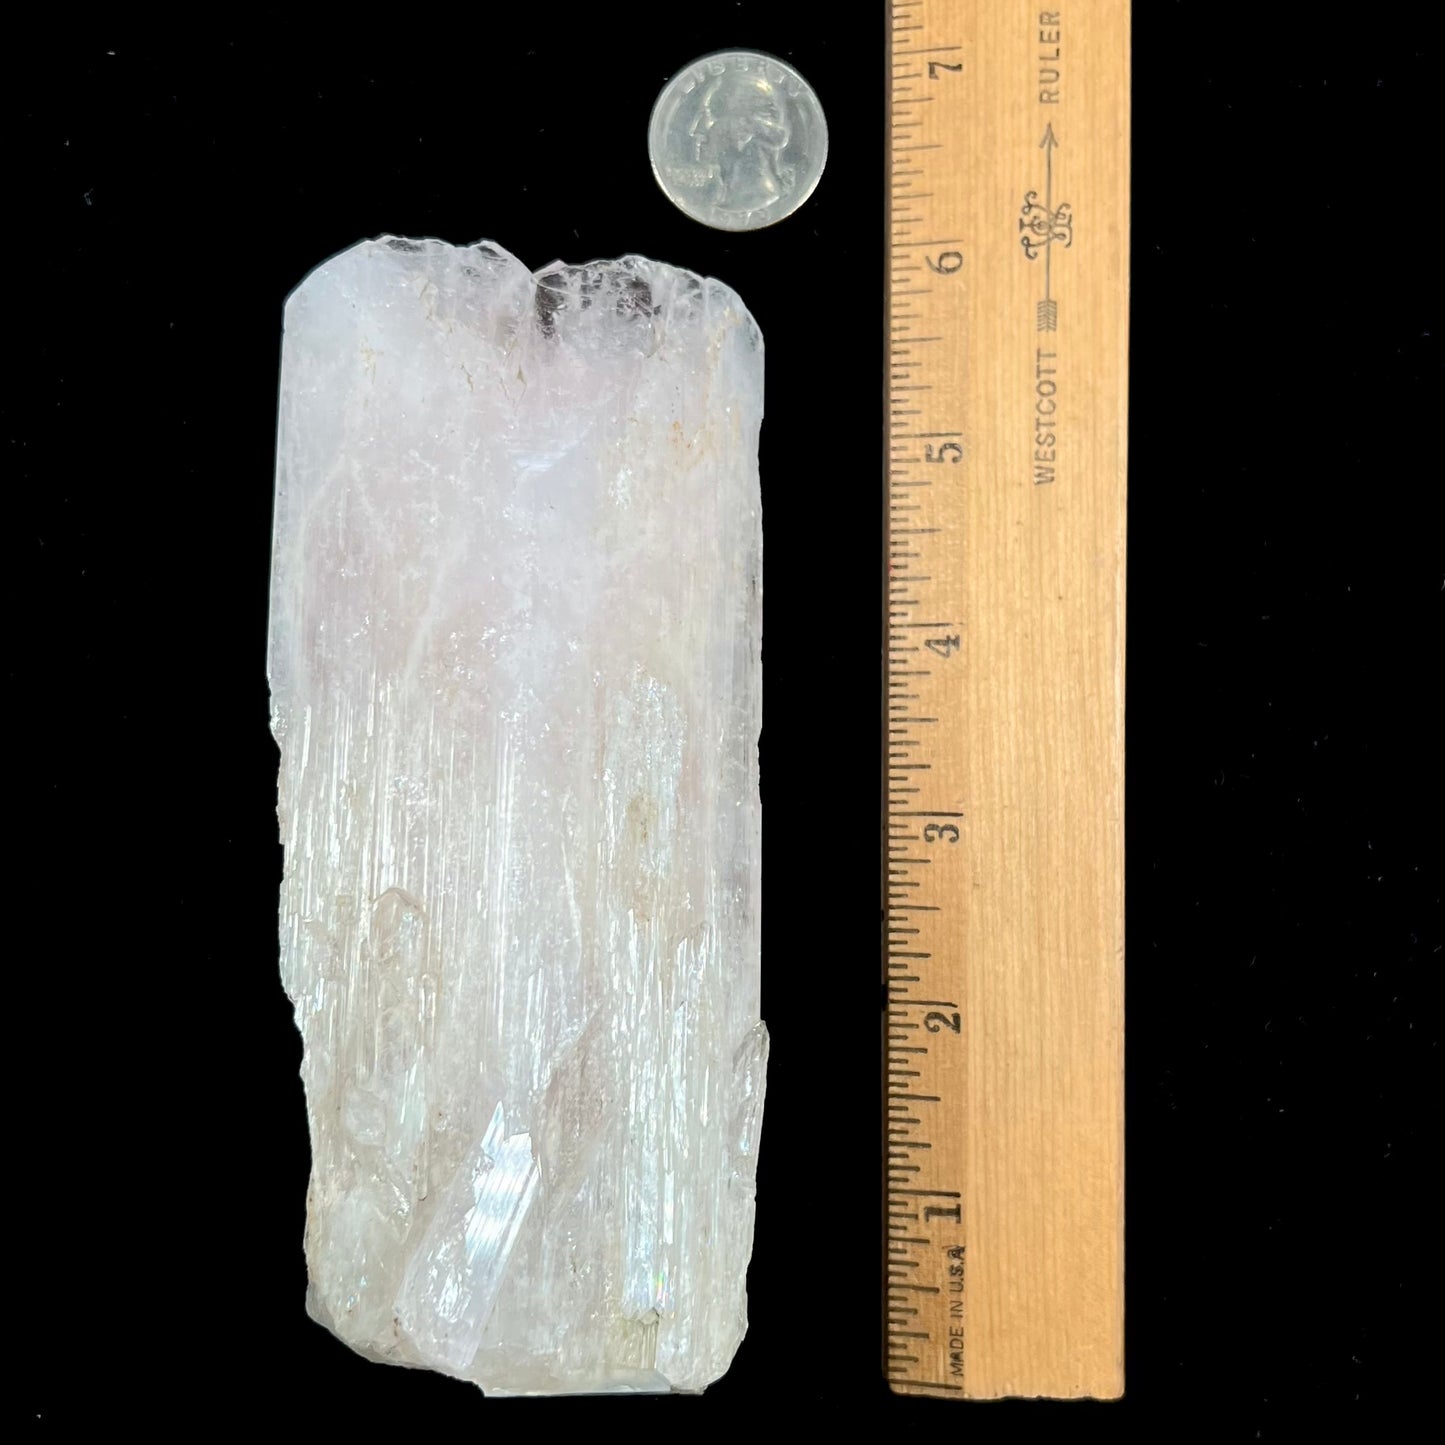 A 5.5 inch long pink danburite crystal that weighs over one pound.